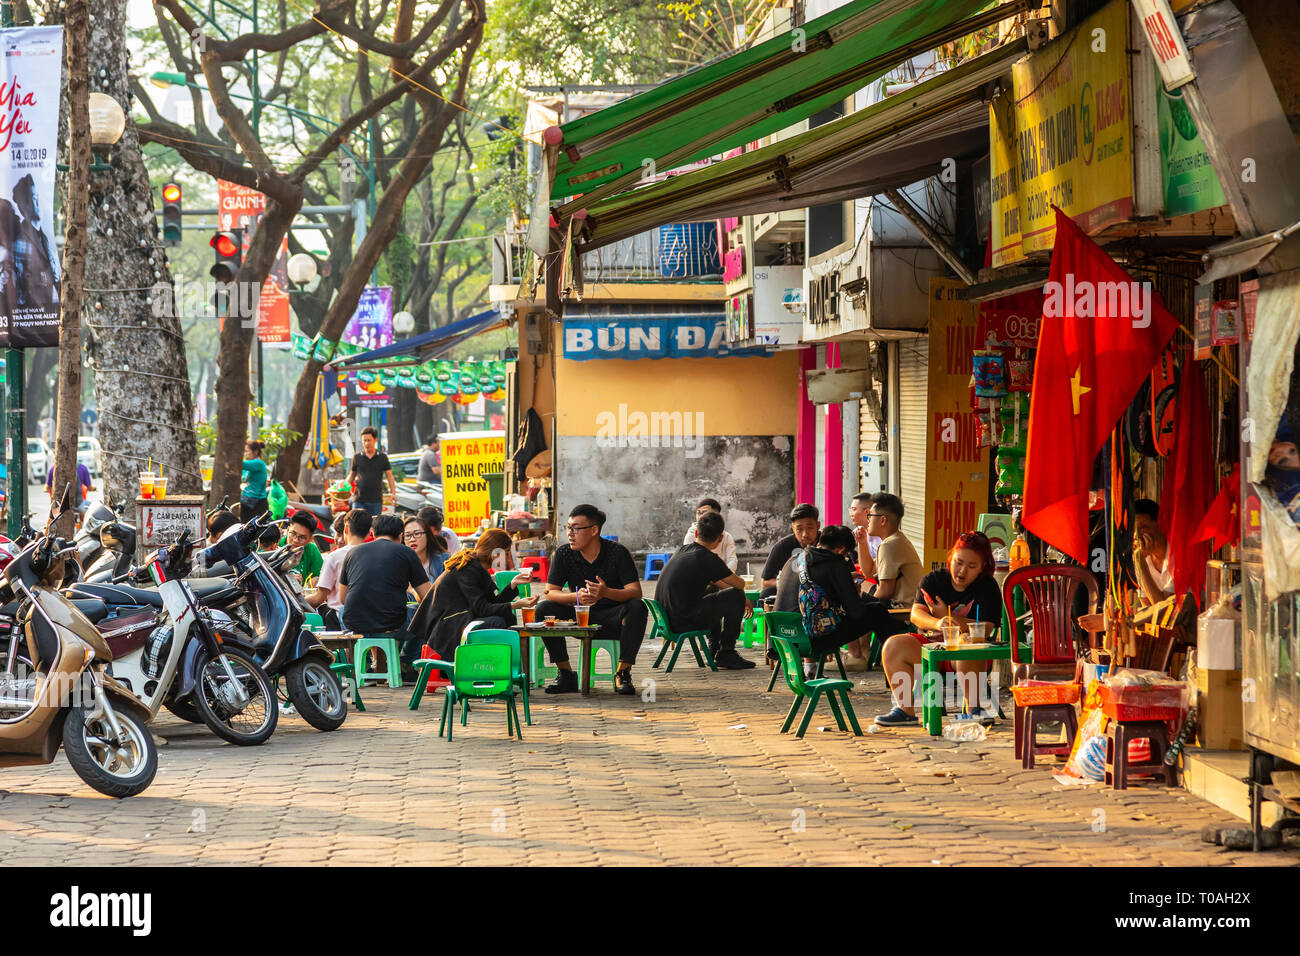 Young students having coffee and drinks at a street cafe, Old Quarter, Hanoi, Vietnam, Asia Stock Photo